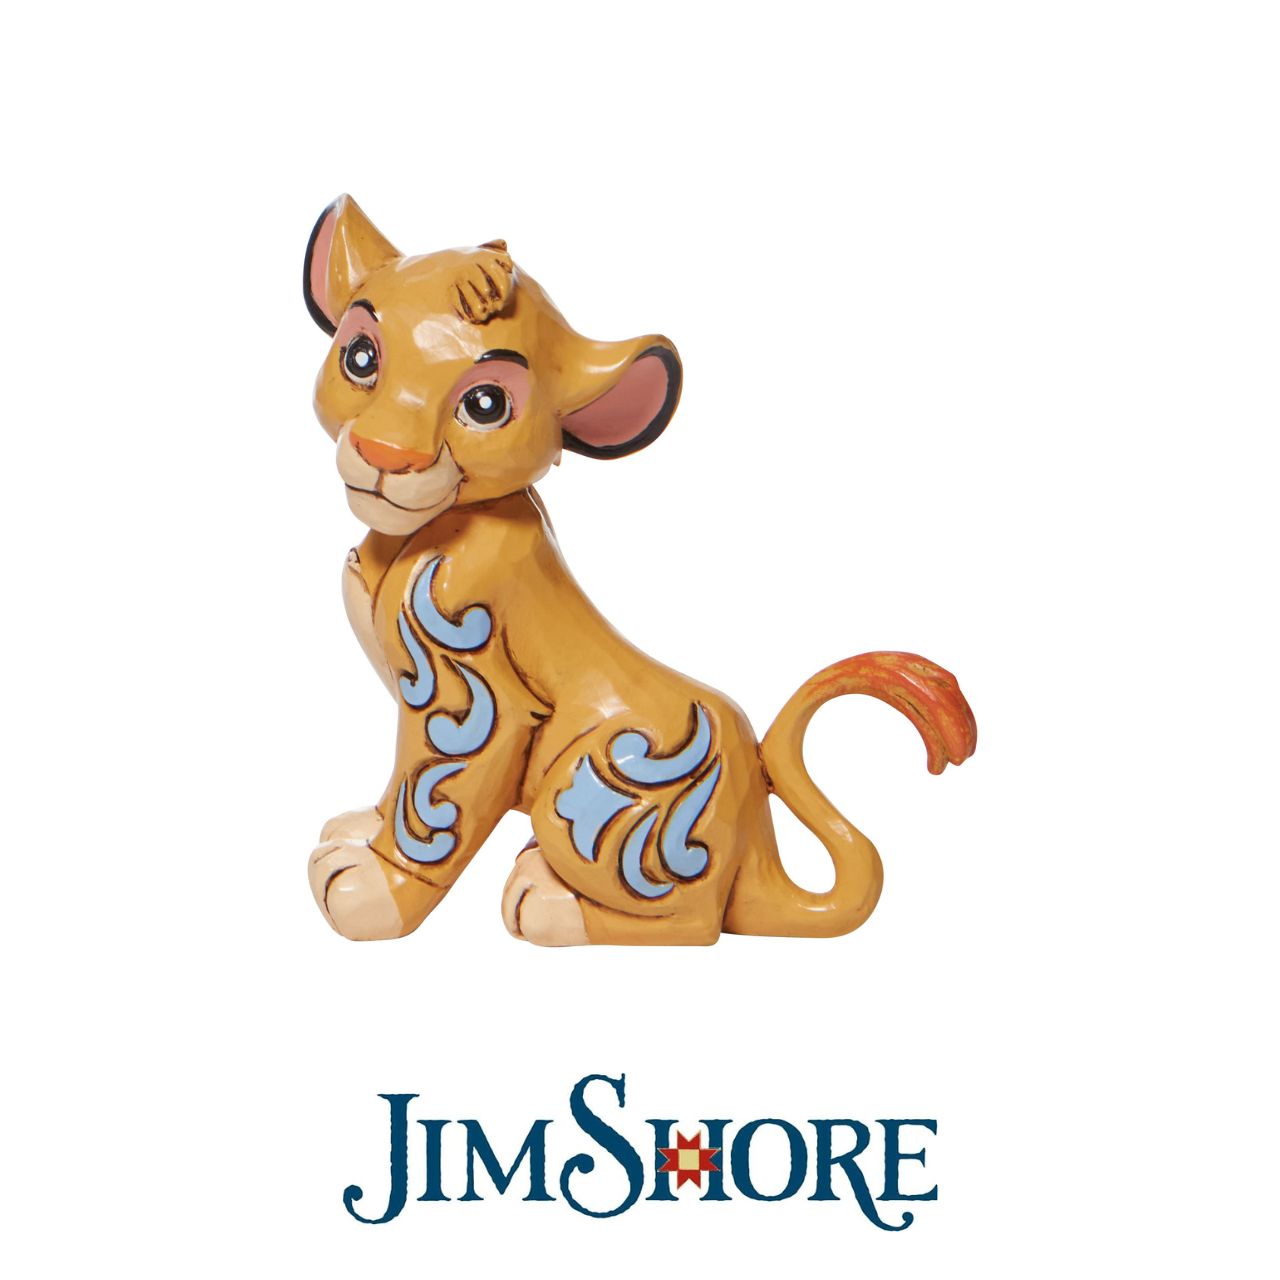 Jim Shore Disney Simba Mini Figurine  Simba, the cub to be king, boasts an adorable expression in this Jim Shore statuette. With folksy patterns down his side, he's a vision of playfulness and charm. Looking more like a house cat than a lion, he's the perfect addition to your home. Hand painted and hand sculpted high quality cast stone. Packaged in a branded giftbox.